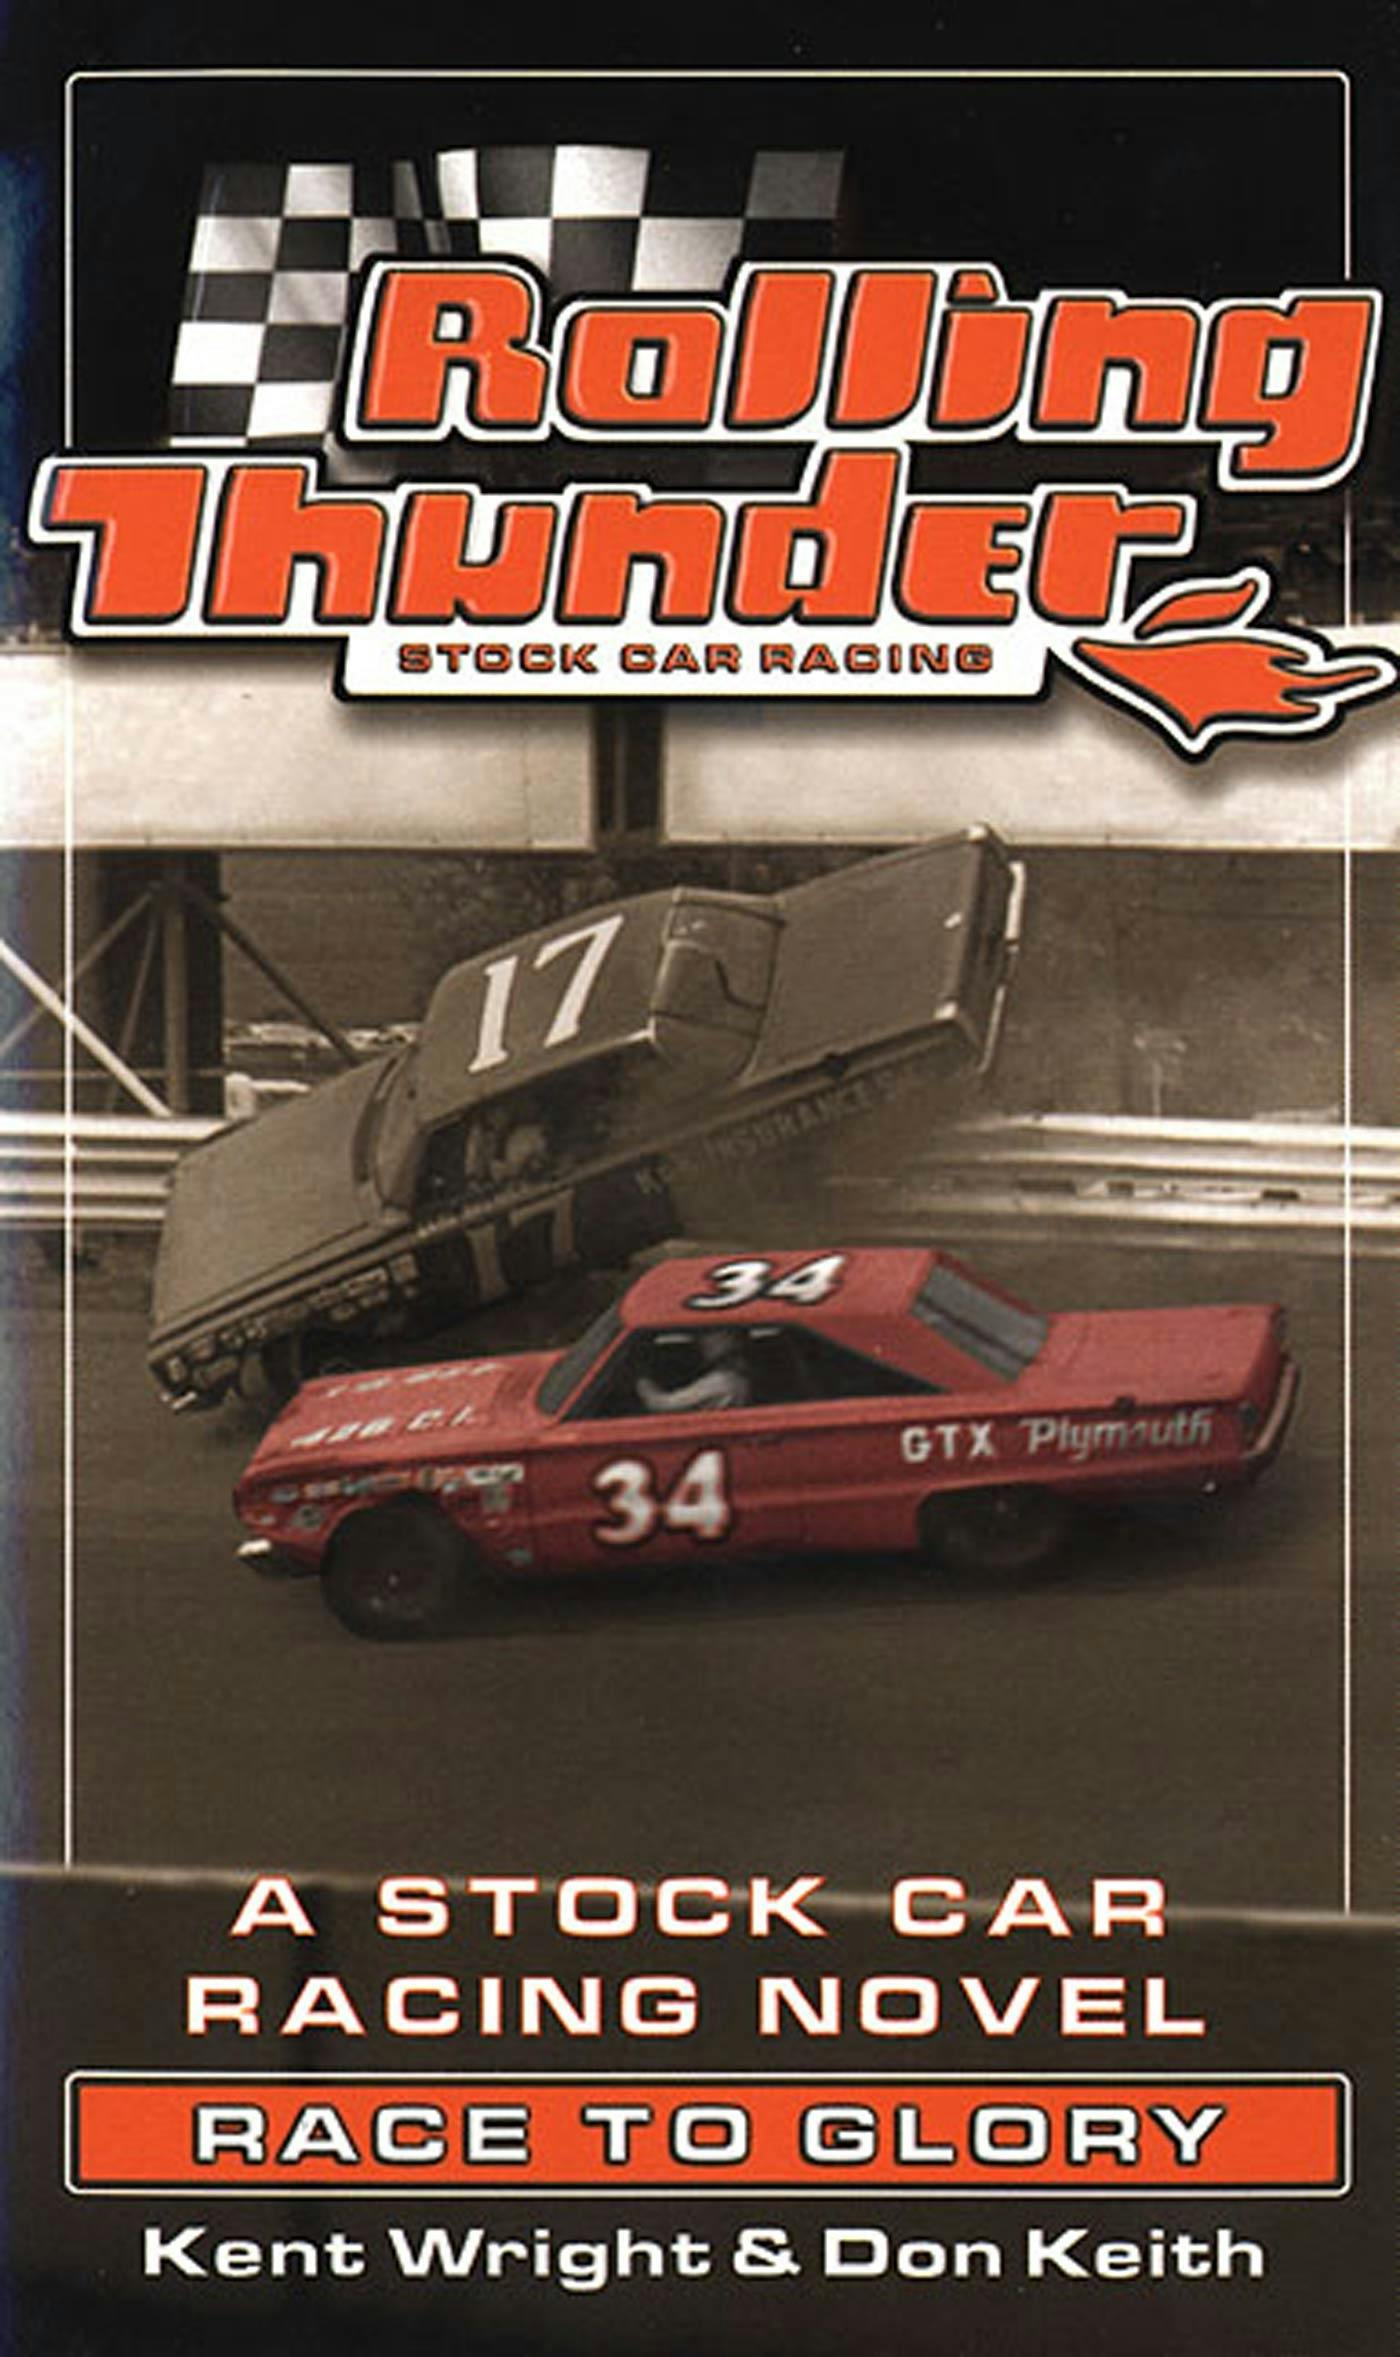 Cover for the book titled as: Rolling Thunder Stock Car Racing: Race To Glory